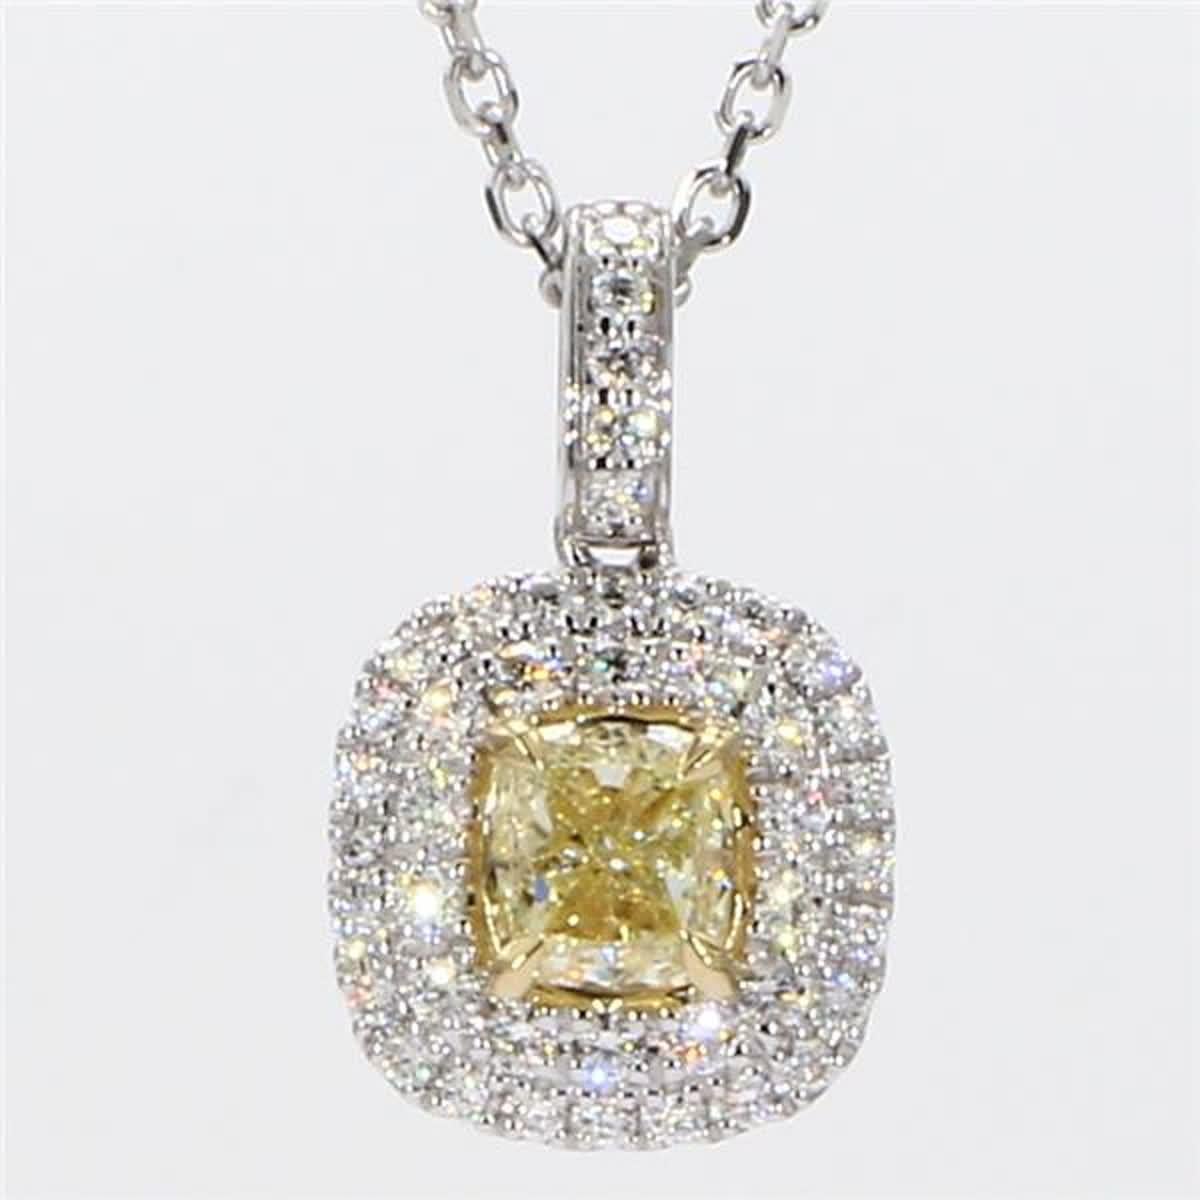 RareGemWorld's intriguing GIA certified diamond pendant. Mounted in a beautiful 18K Yellow and White Gold setting with a natural cushion cut yellow diamond. The yellow diamond is surrounded by small round natural white diamond melee. This pendant is